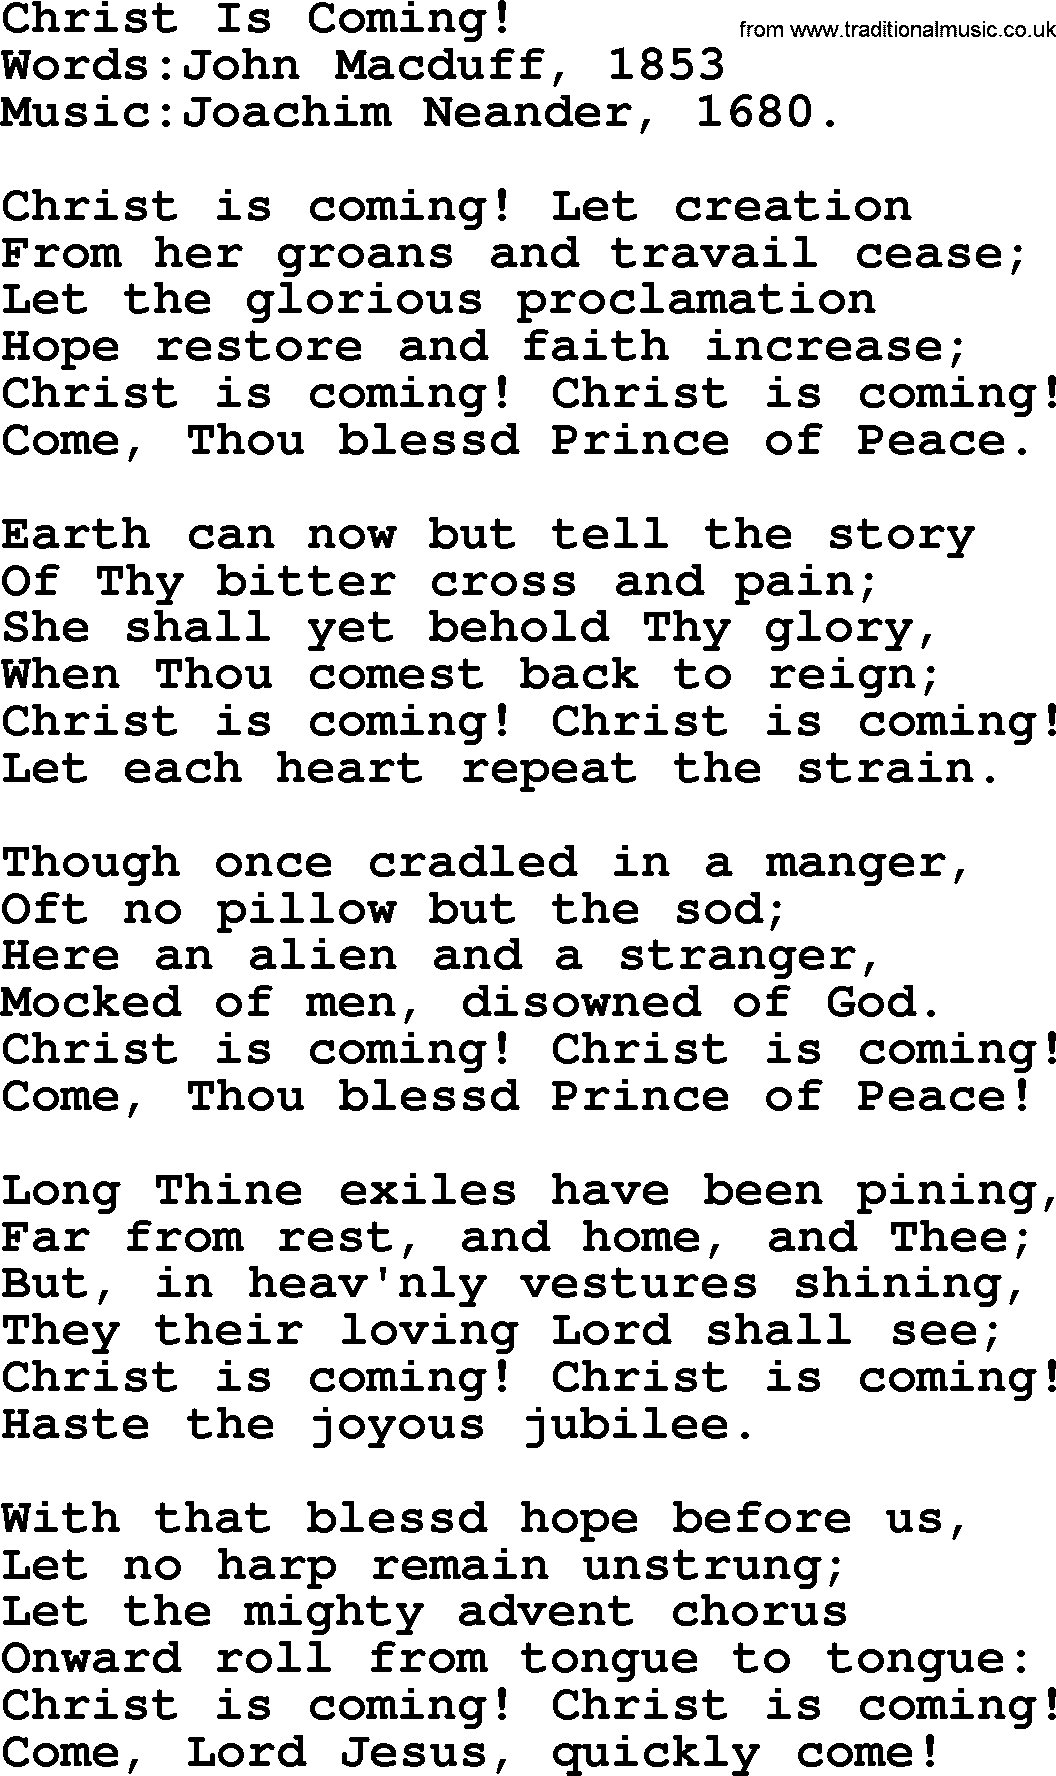 Christian hymns and songs about Jesus' Return(The Second Coming): Christ Is Coming!, lyrics with PDF